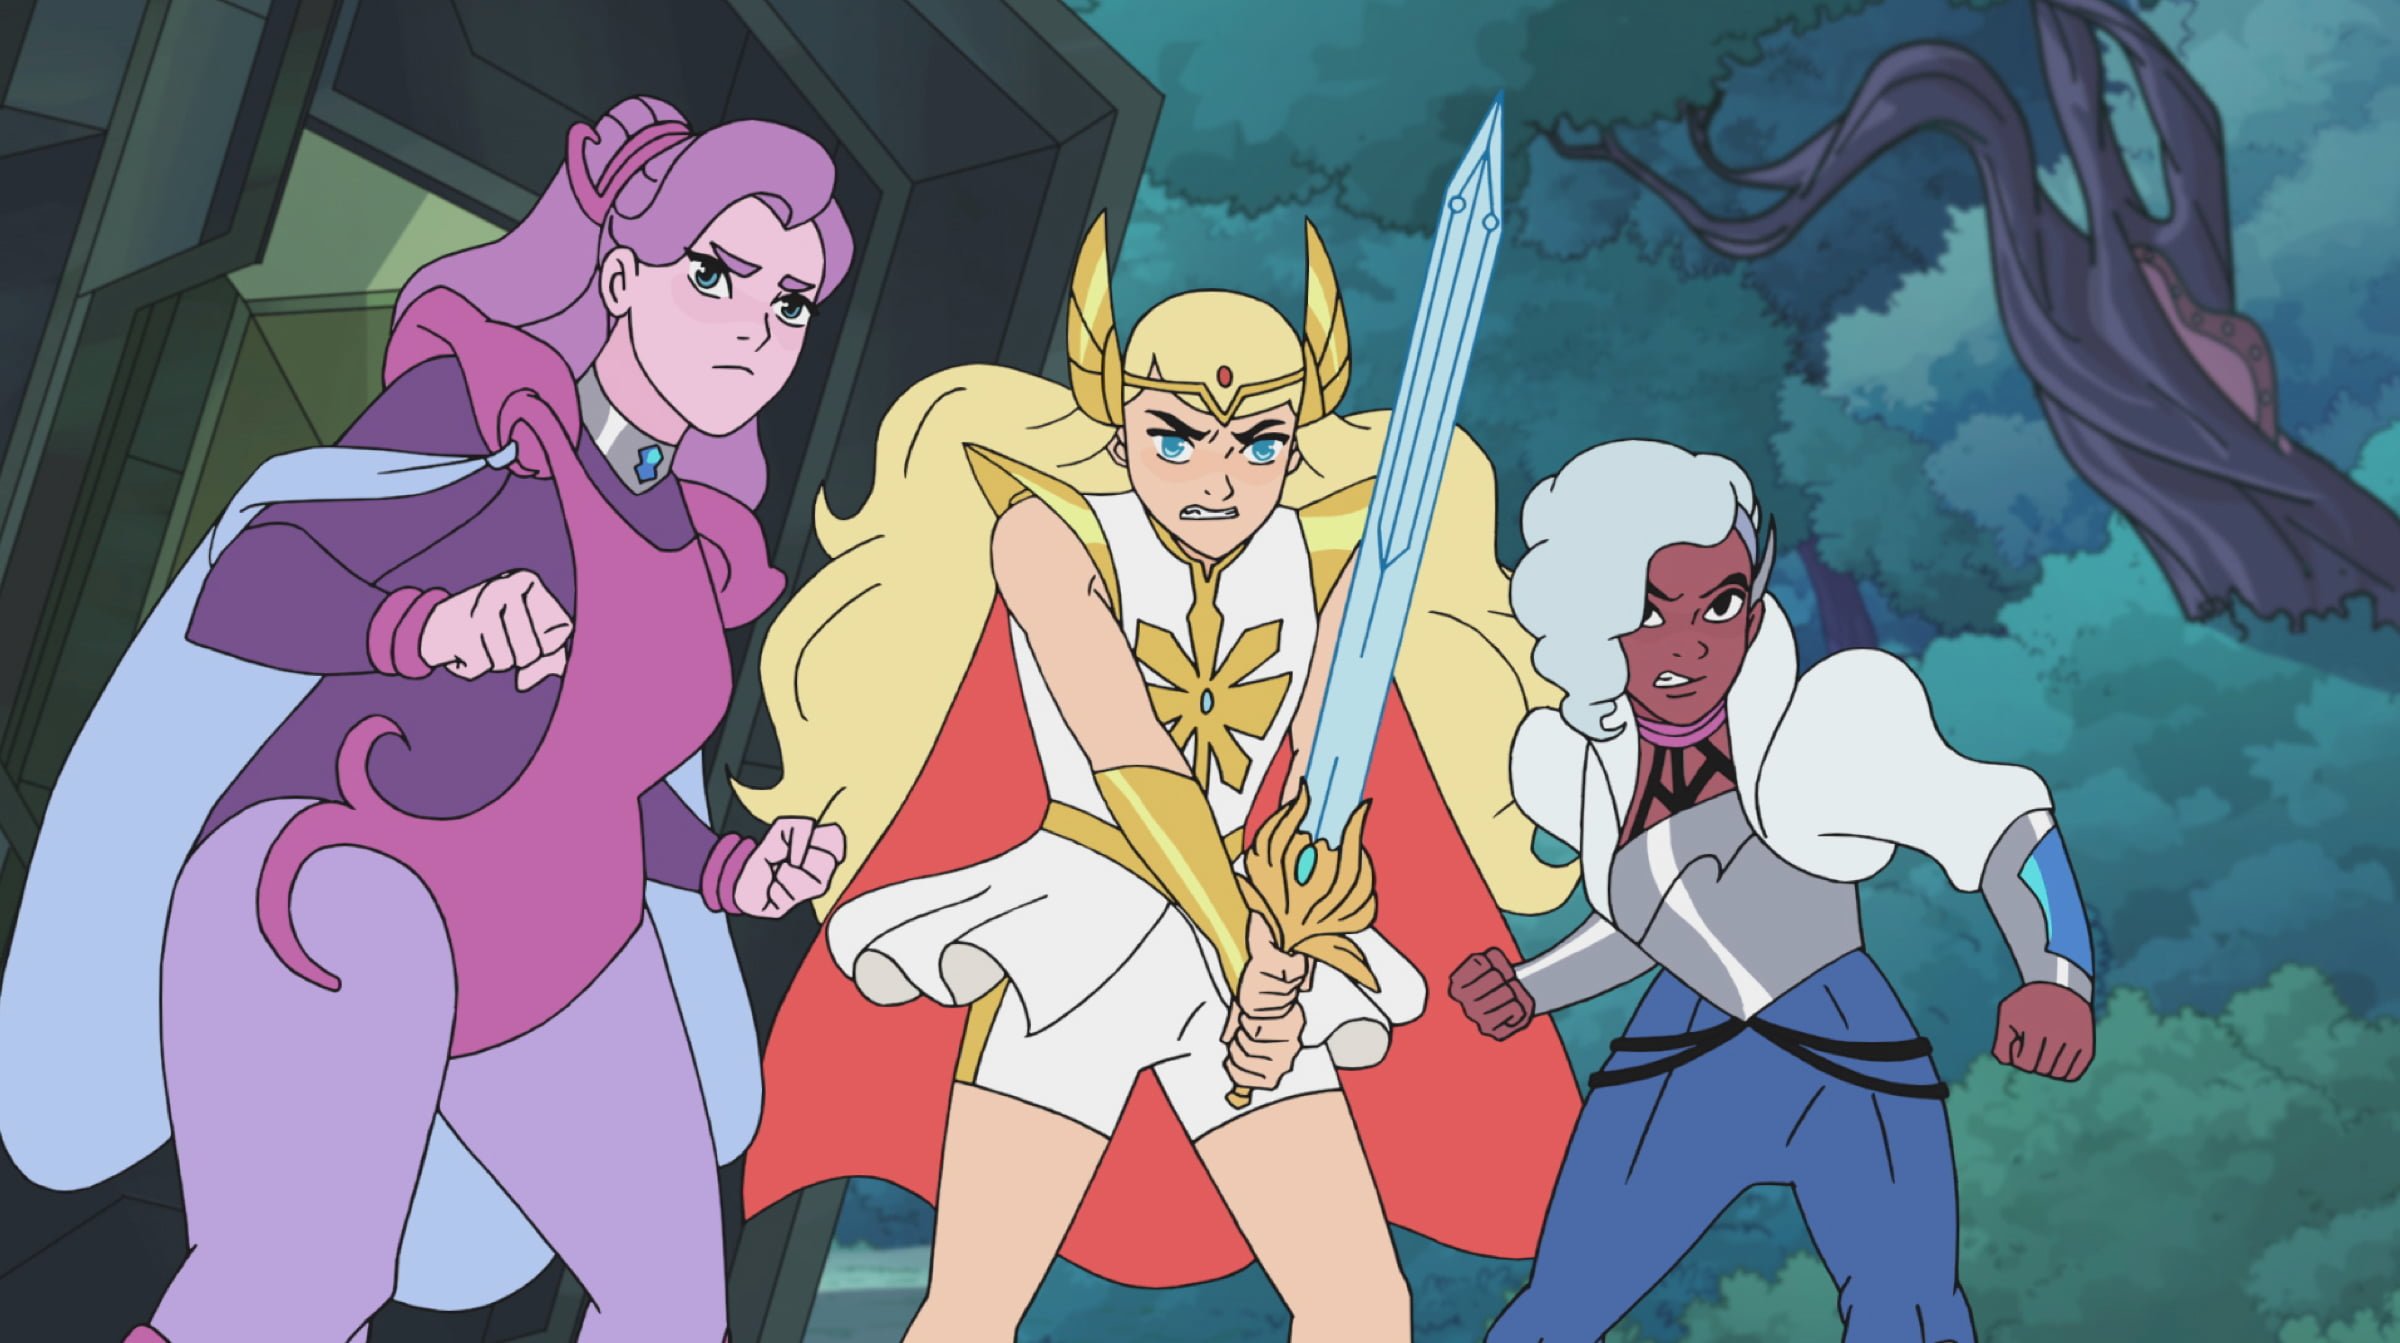 RELATED: Glimmer Grows Up In The Trailer For 'She-Ra And The Princesse...